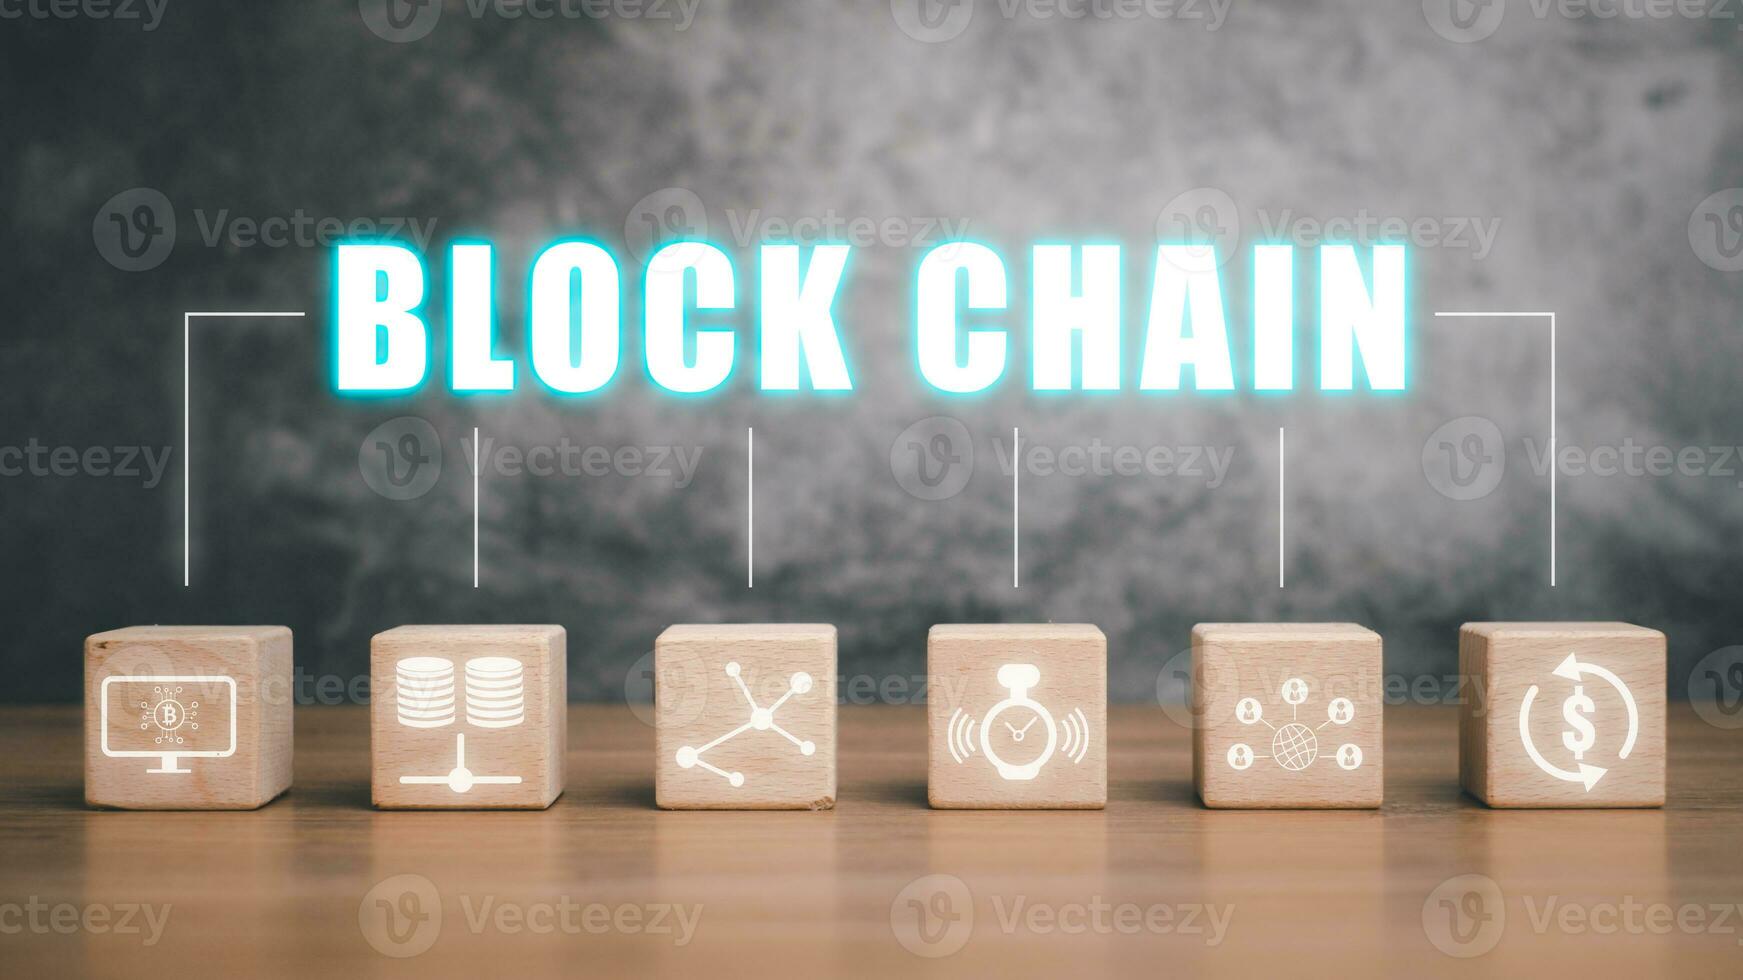 Blockchain technology concept, Wooden block on wooden desk with blockchain icon on vr screen, Fintech concept with encrypted ledger blocks chained. photo